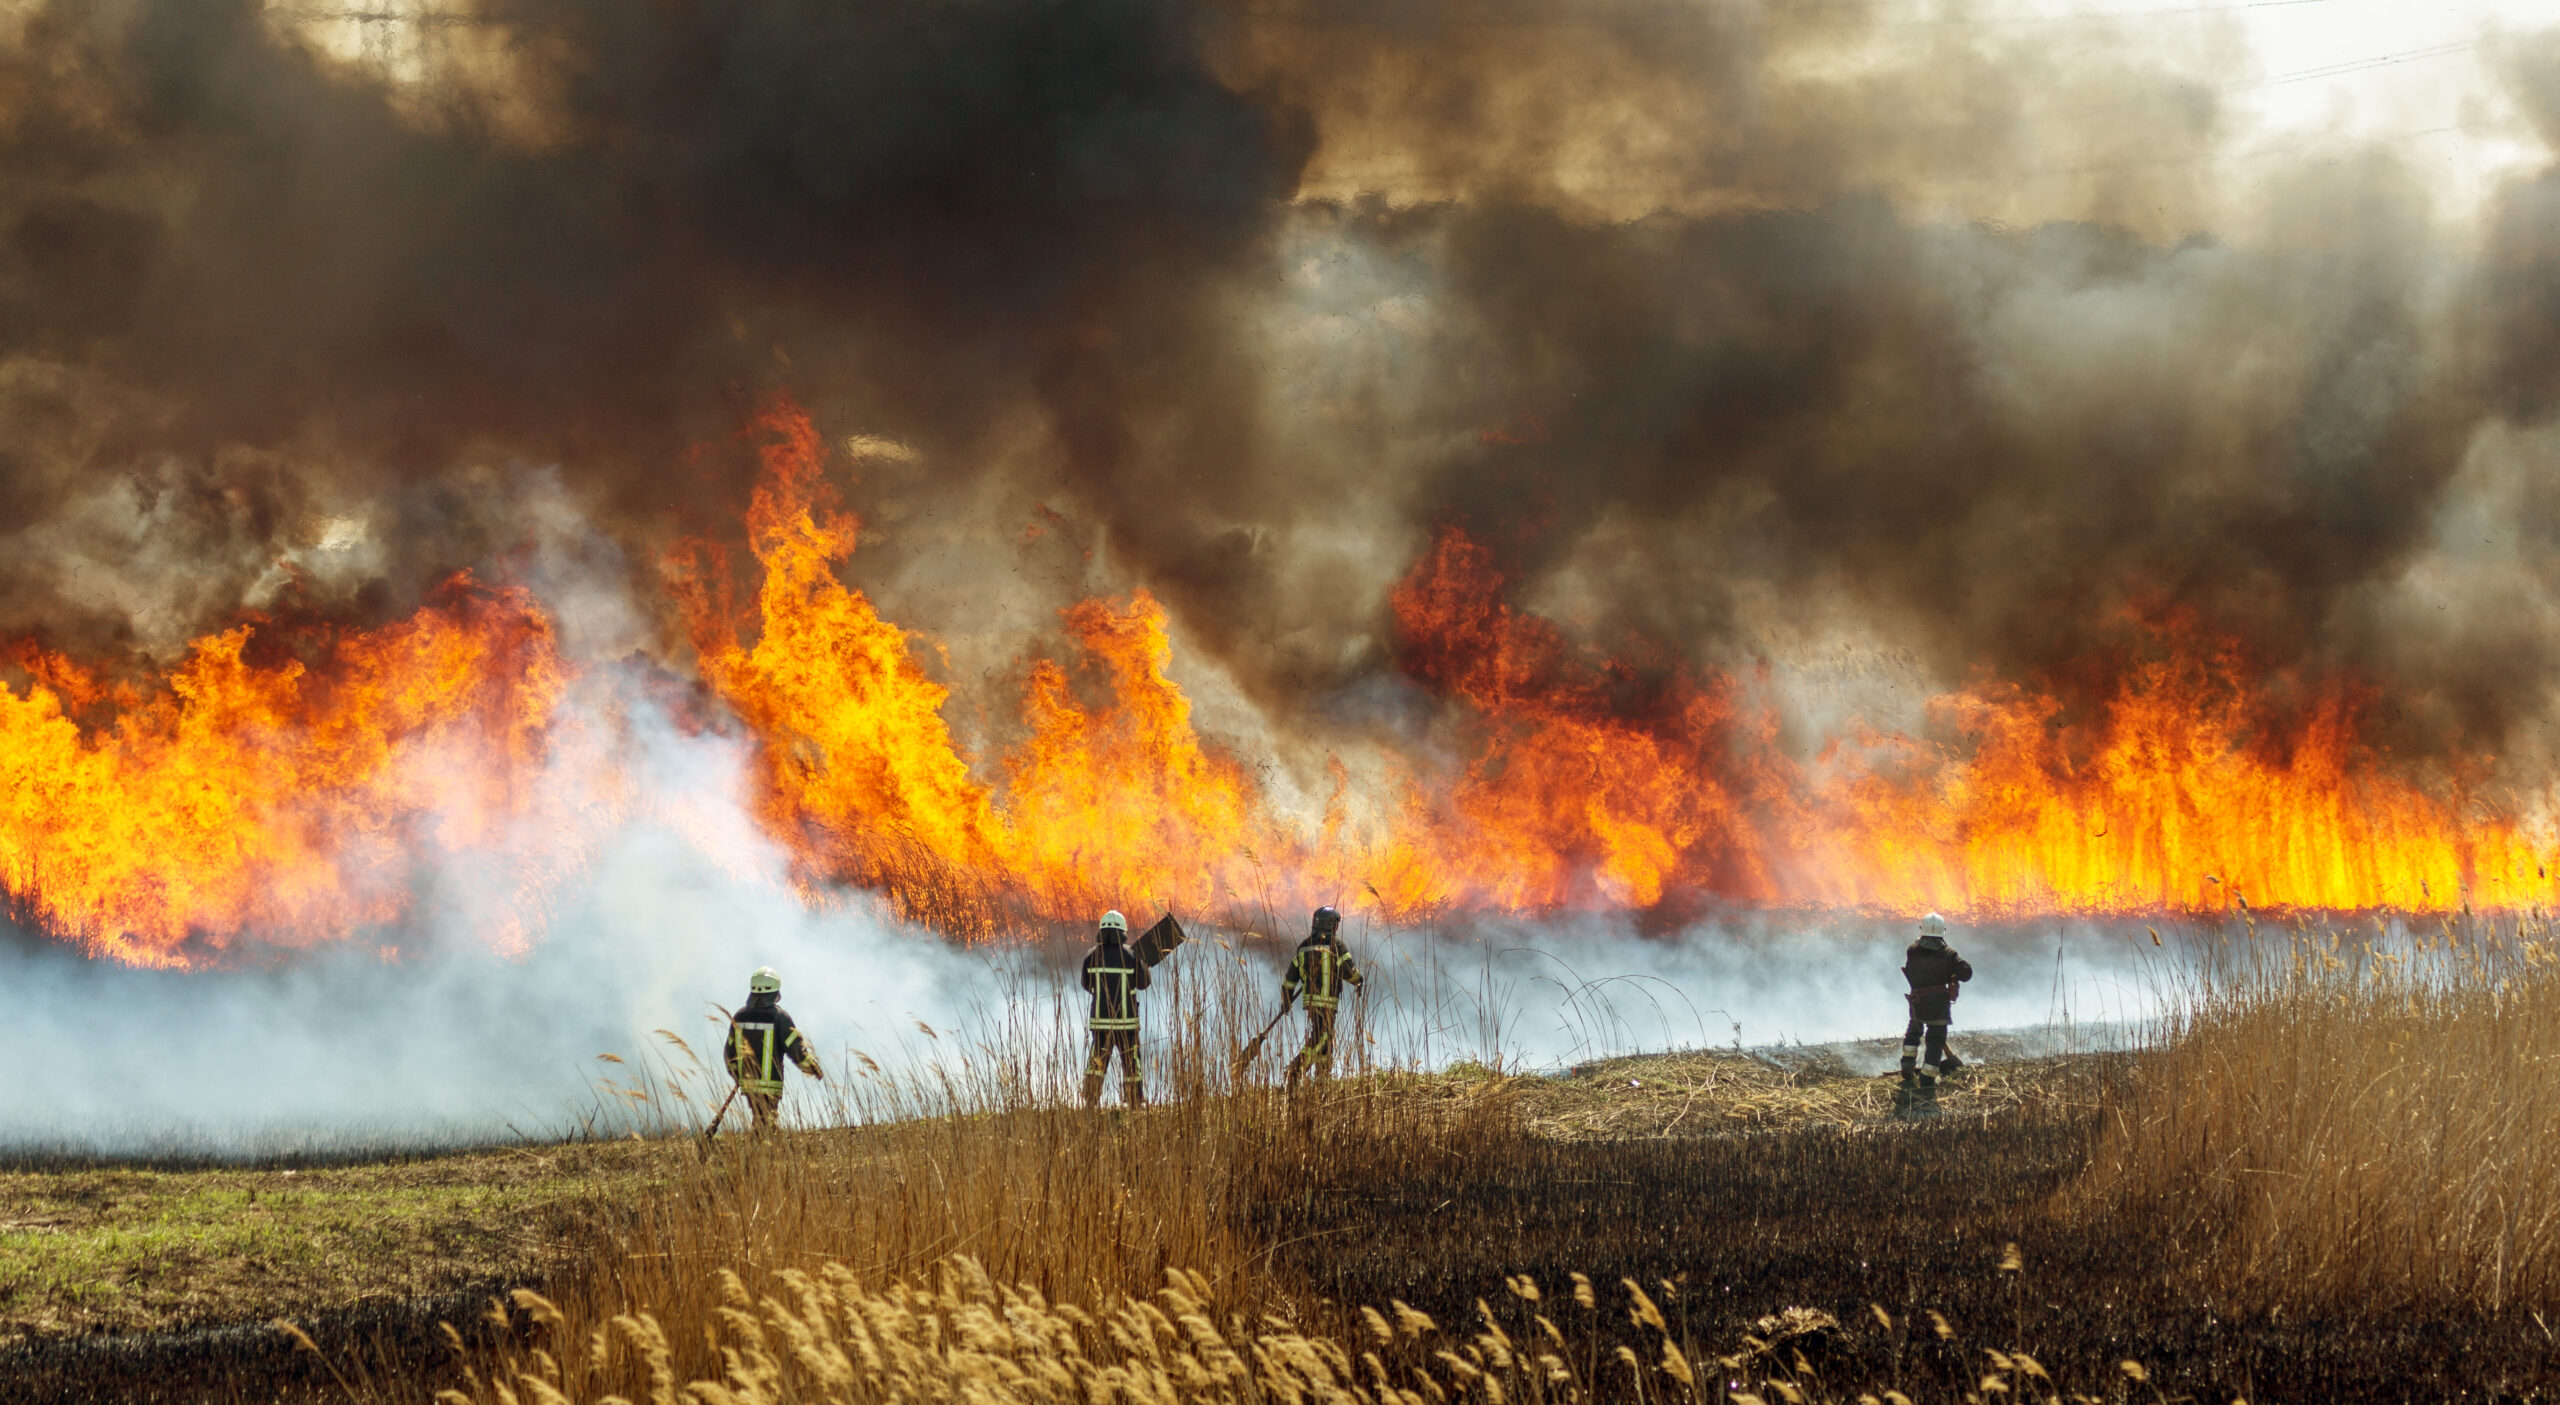 Wildfire Preparedness: Plan and Respond to an Increasingly Frequent Risk